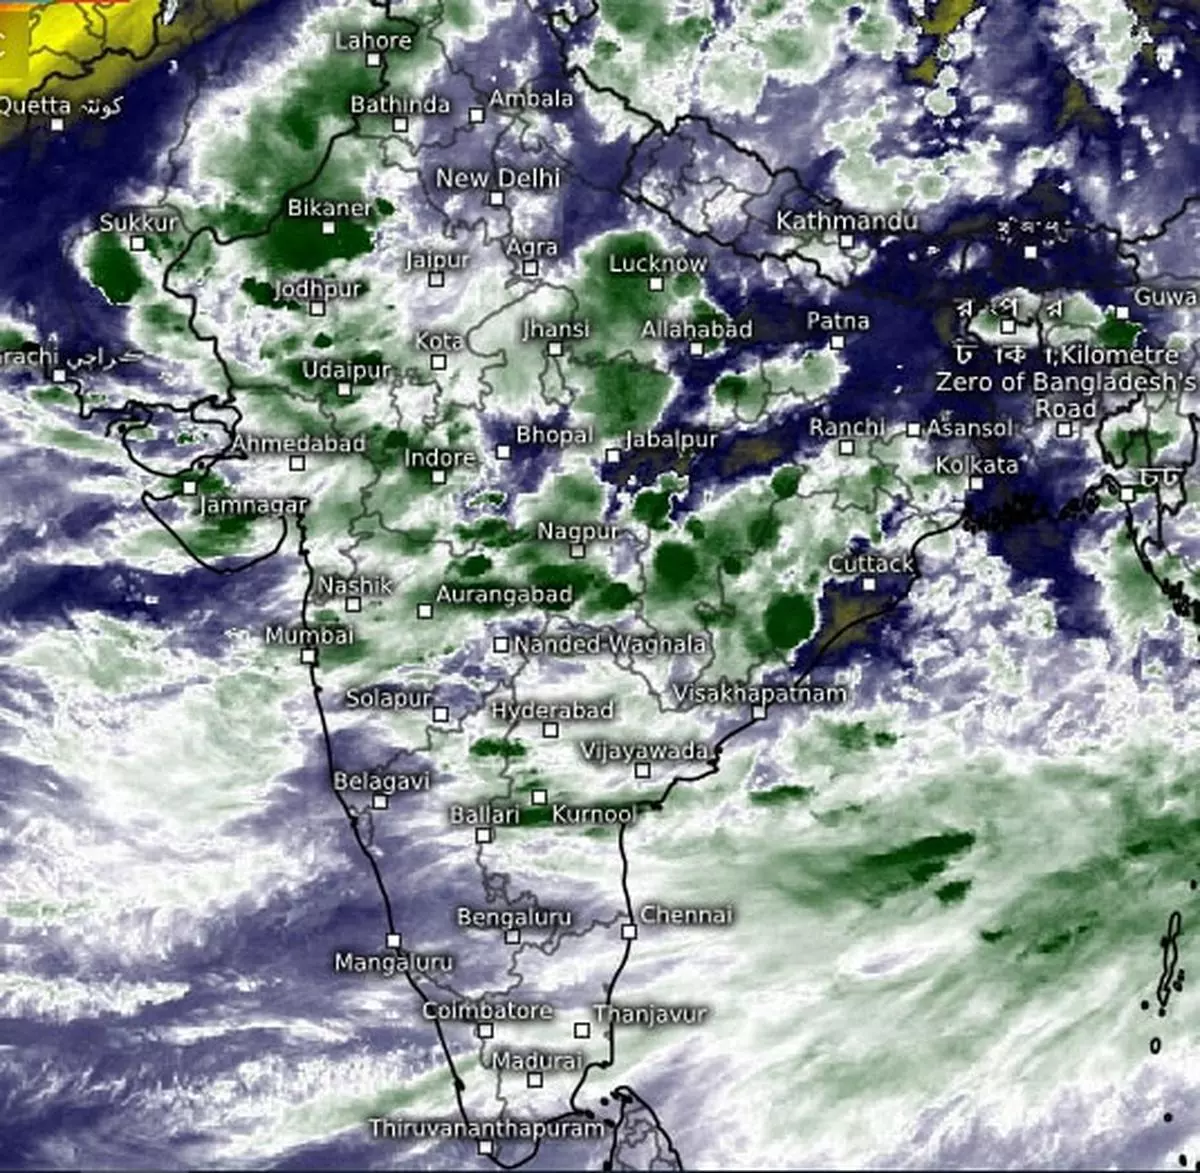 Water vapour map on Sunday evening showed monsoon moisture leaving the South Peninsula to Central India and North-West India even as a low-pressure area over the Bay of Bengal is expected to become a depression in next two days.